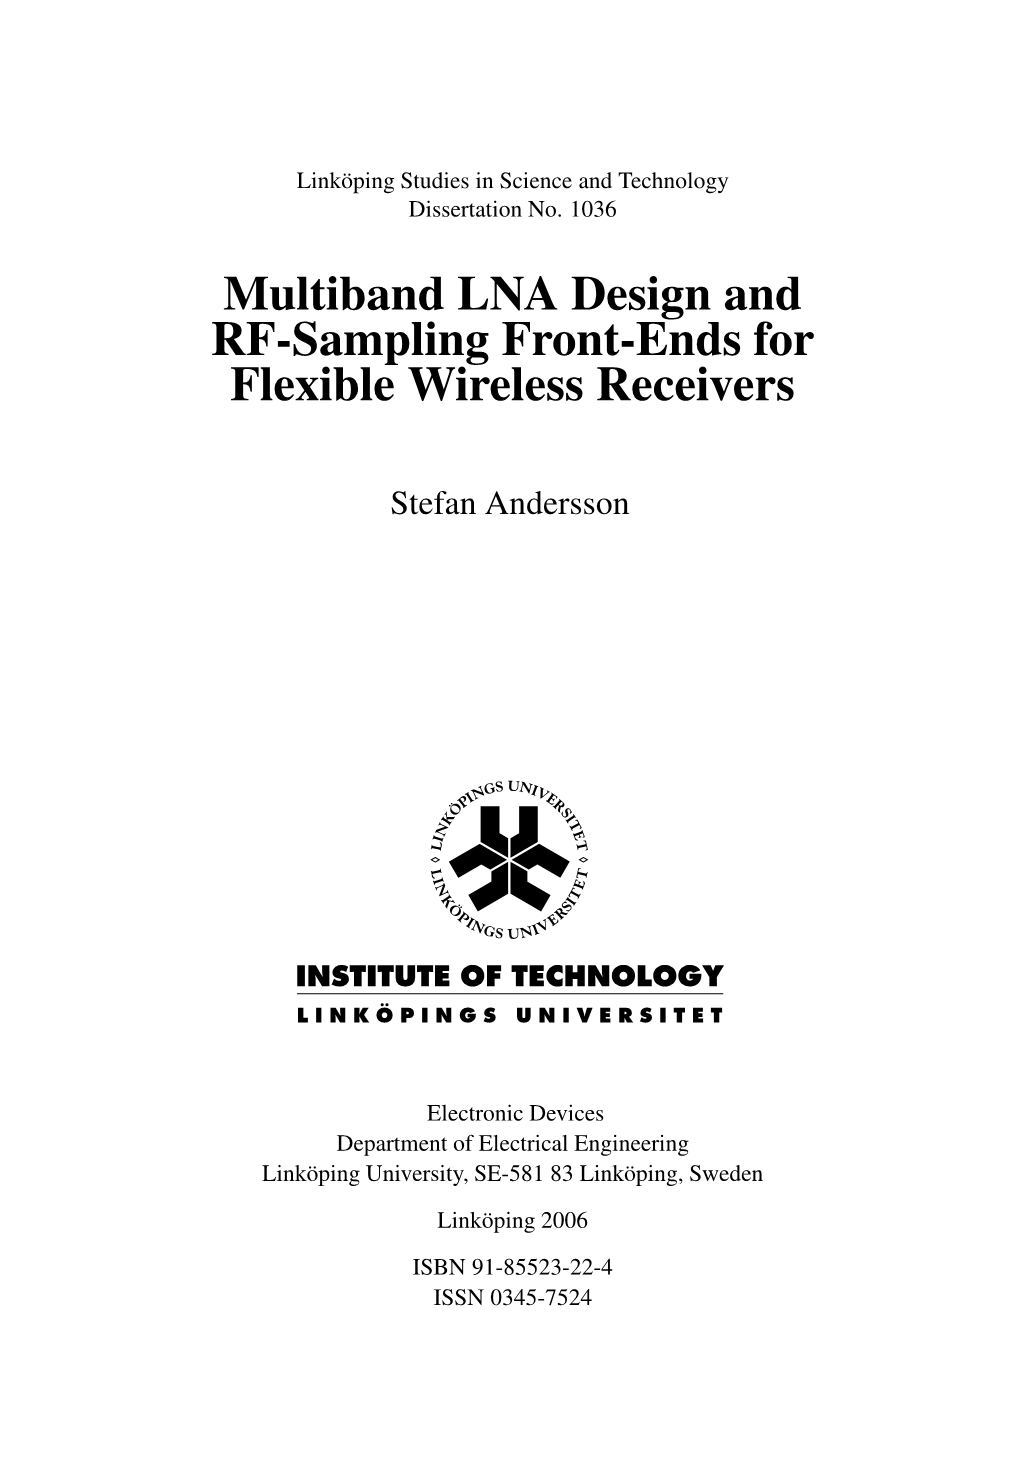 Multiband LNA Design and RF-Sampling Front-Ends for Flexible Wireless Receivers